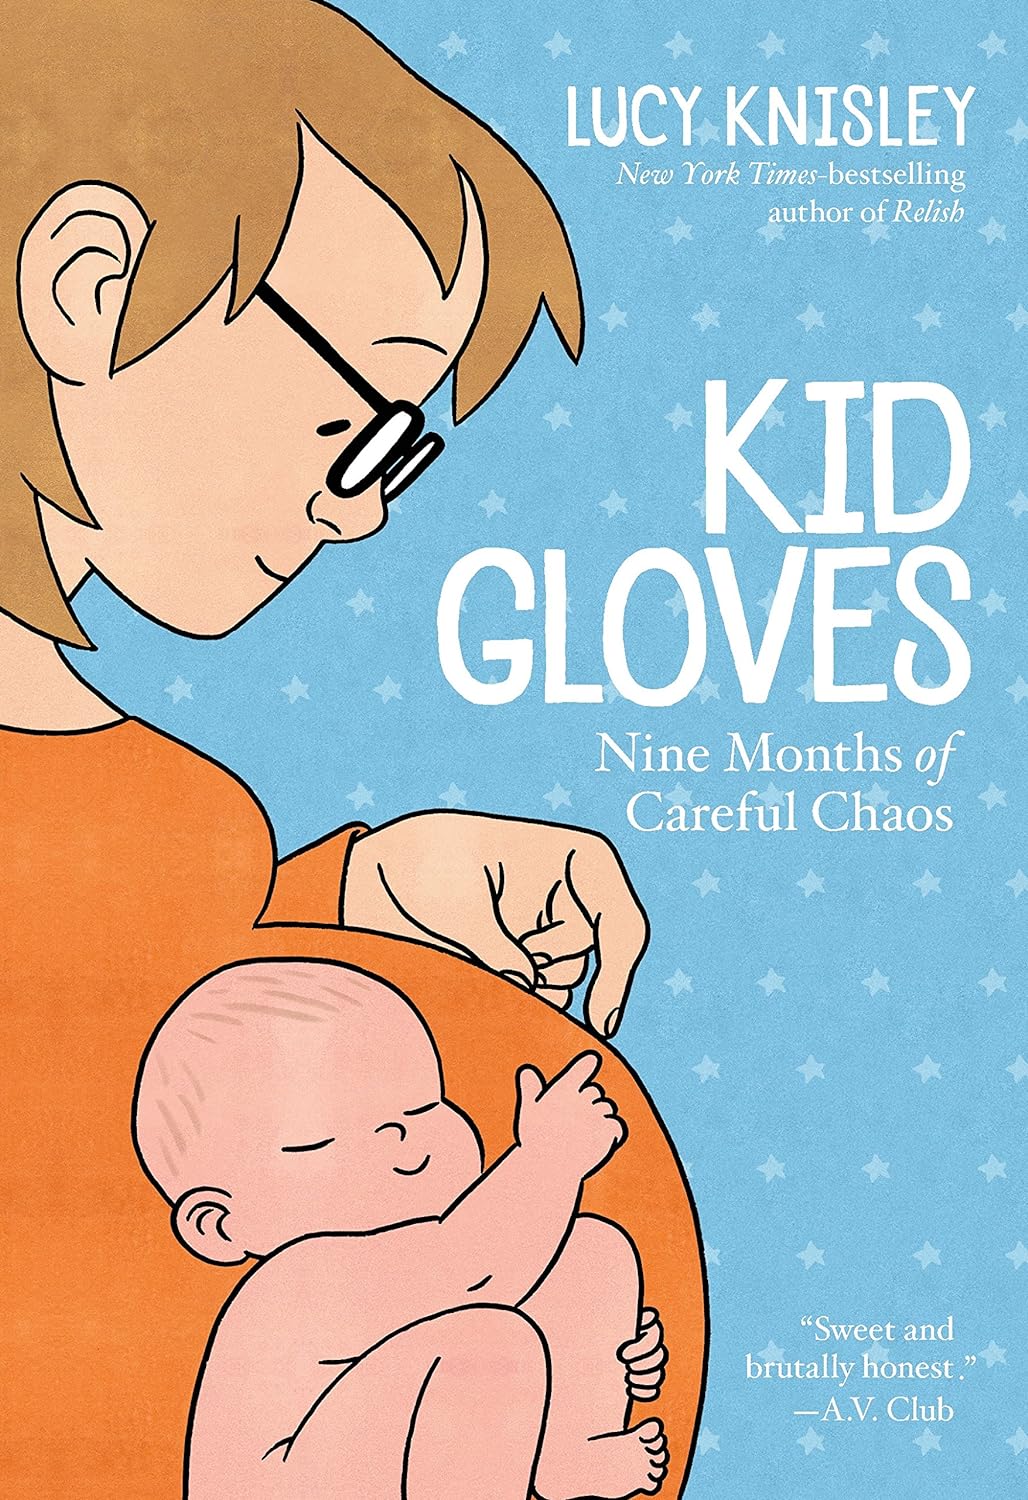 Kid Gloves: Nine Months of Careful Chaos